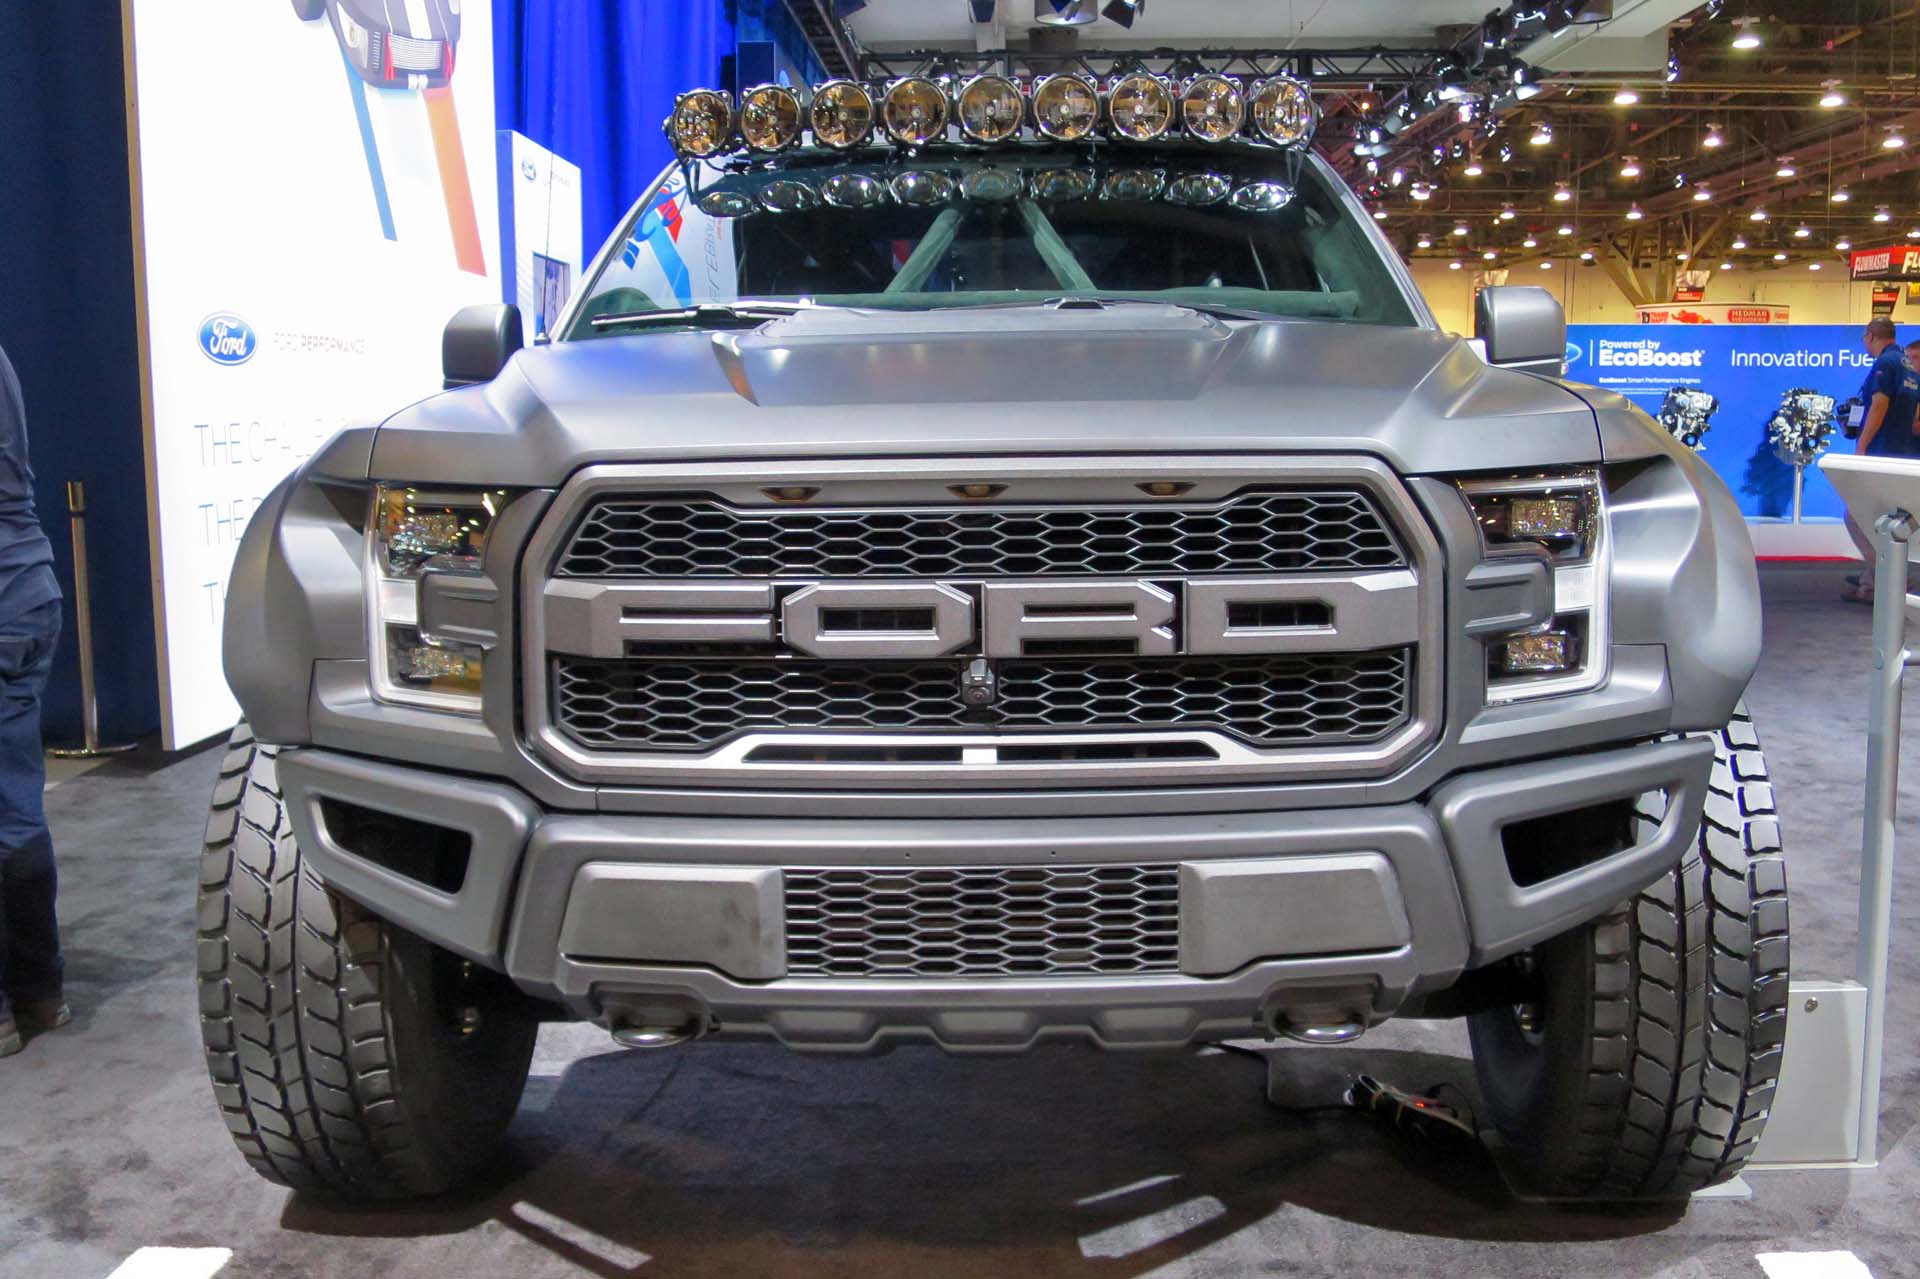 The concept Ford Raptor Pre-Runner, with higher ride height, 39-inch BF Goodrich tires, and six-piston Alcon calipers.